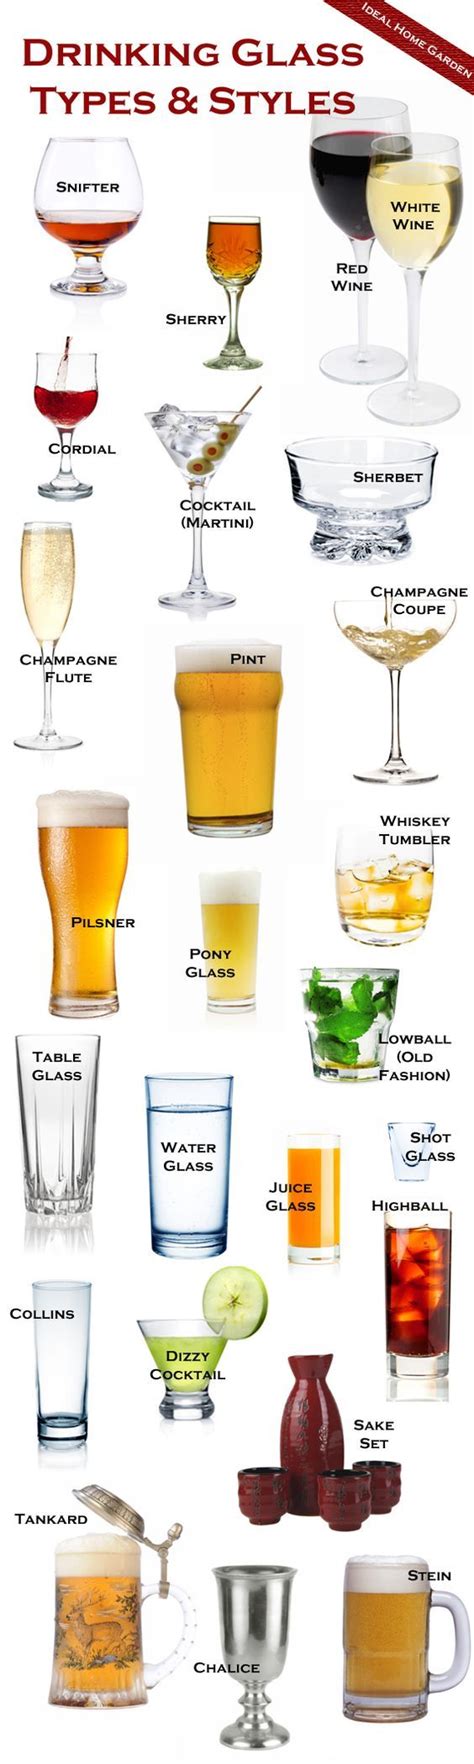 Types Of Drinking Glasses Chart Buy Personalized Glass Coasters And Glassware Ts